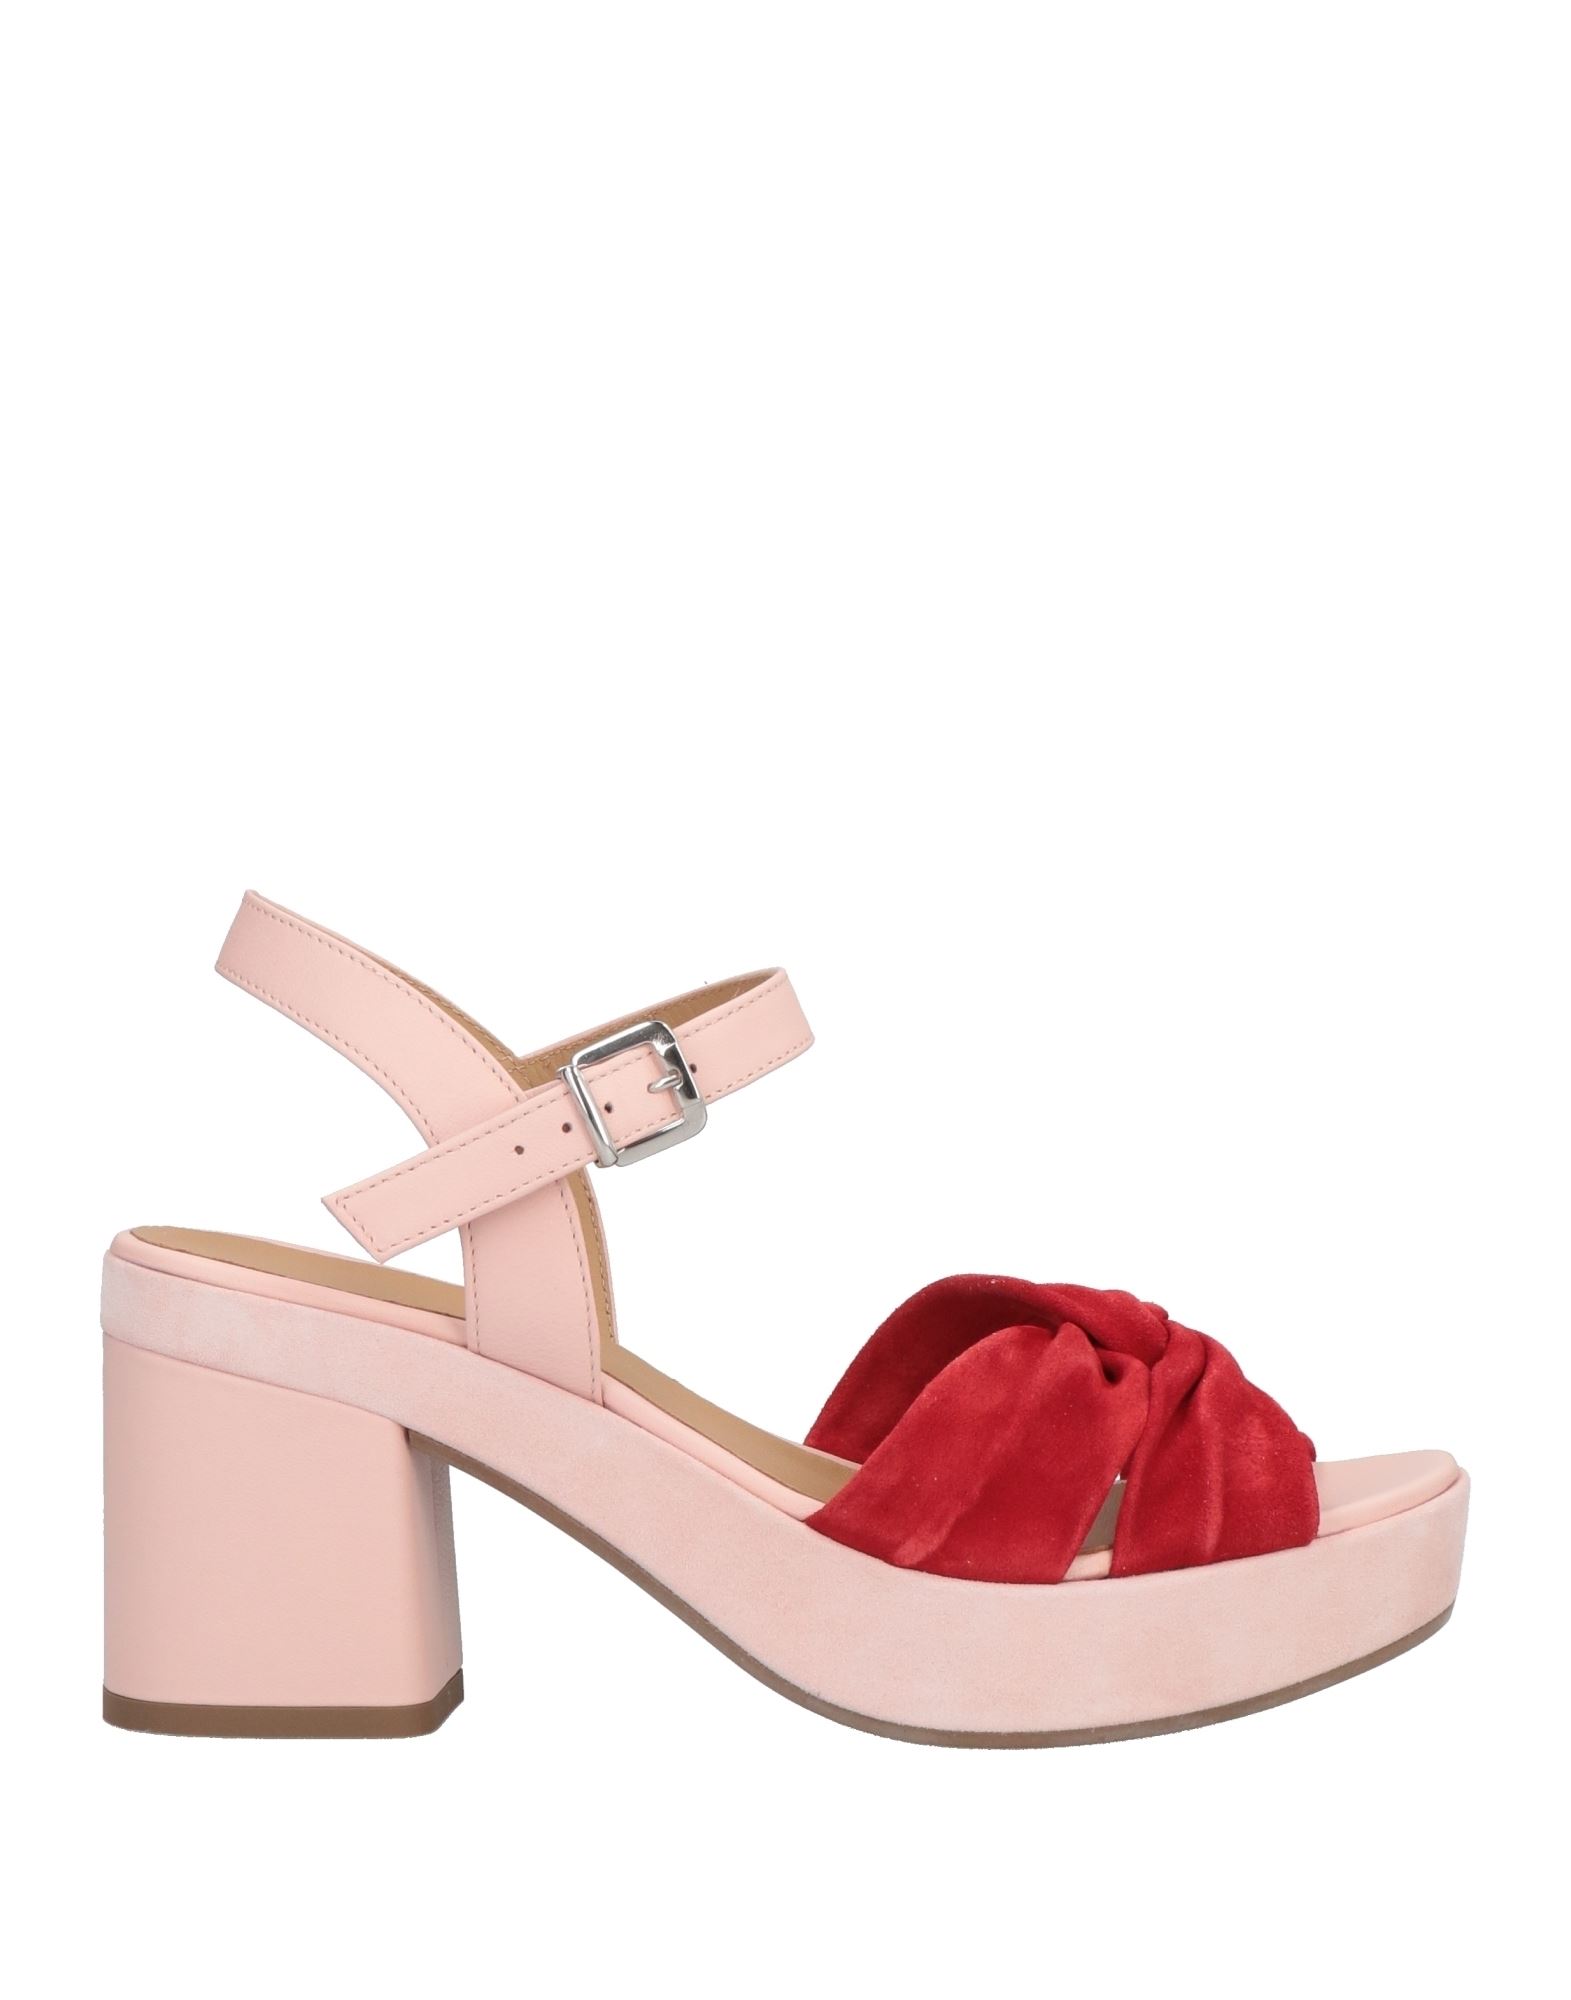 A.testoni Sandals In Red